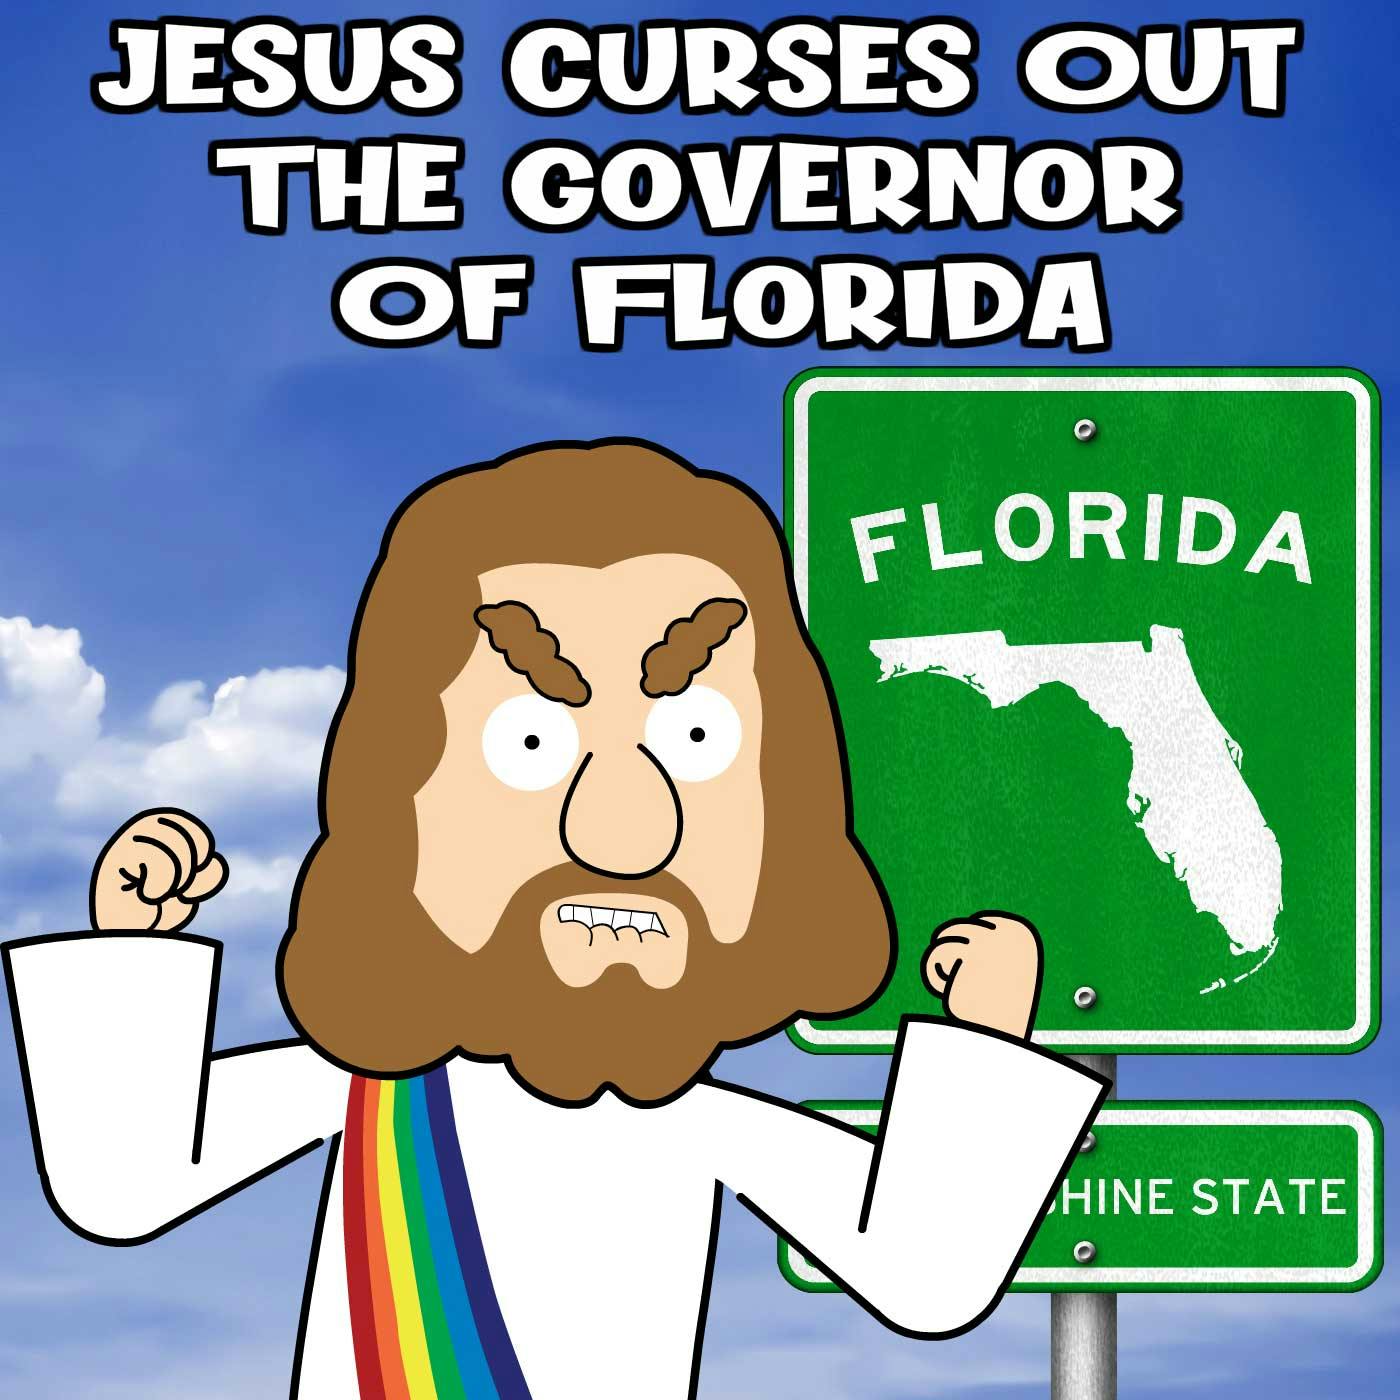 Jesus Curses Out The Governor Of Florida